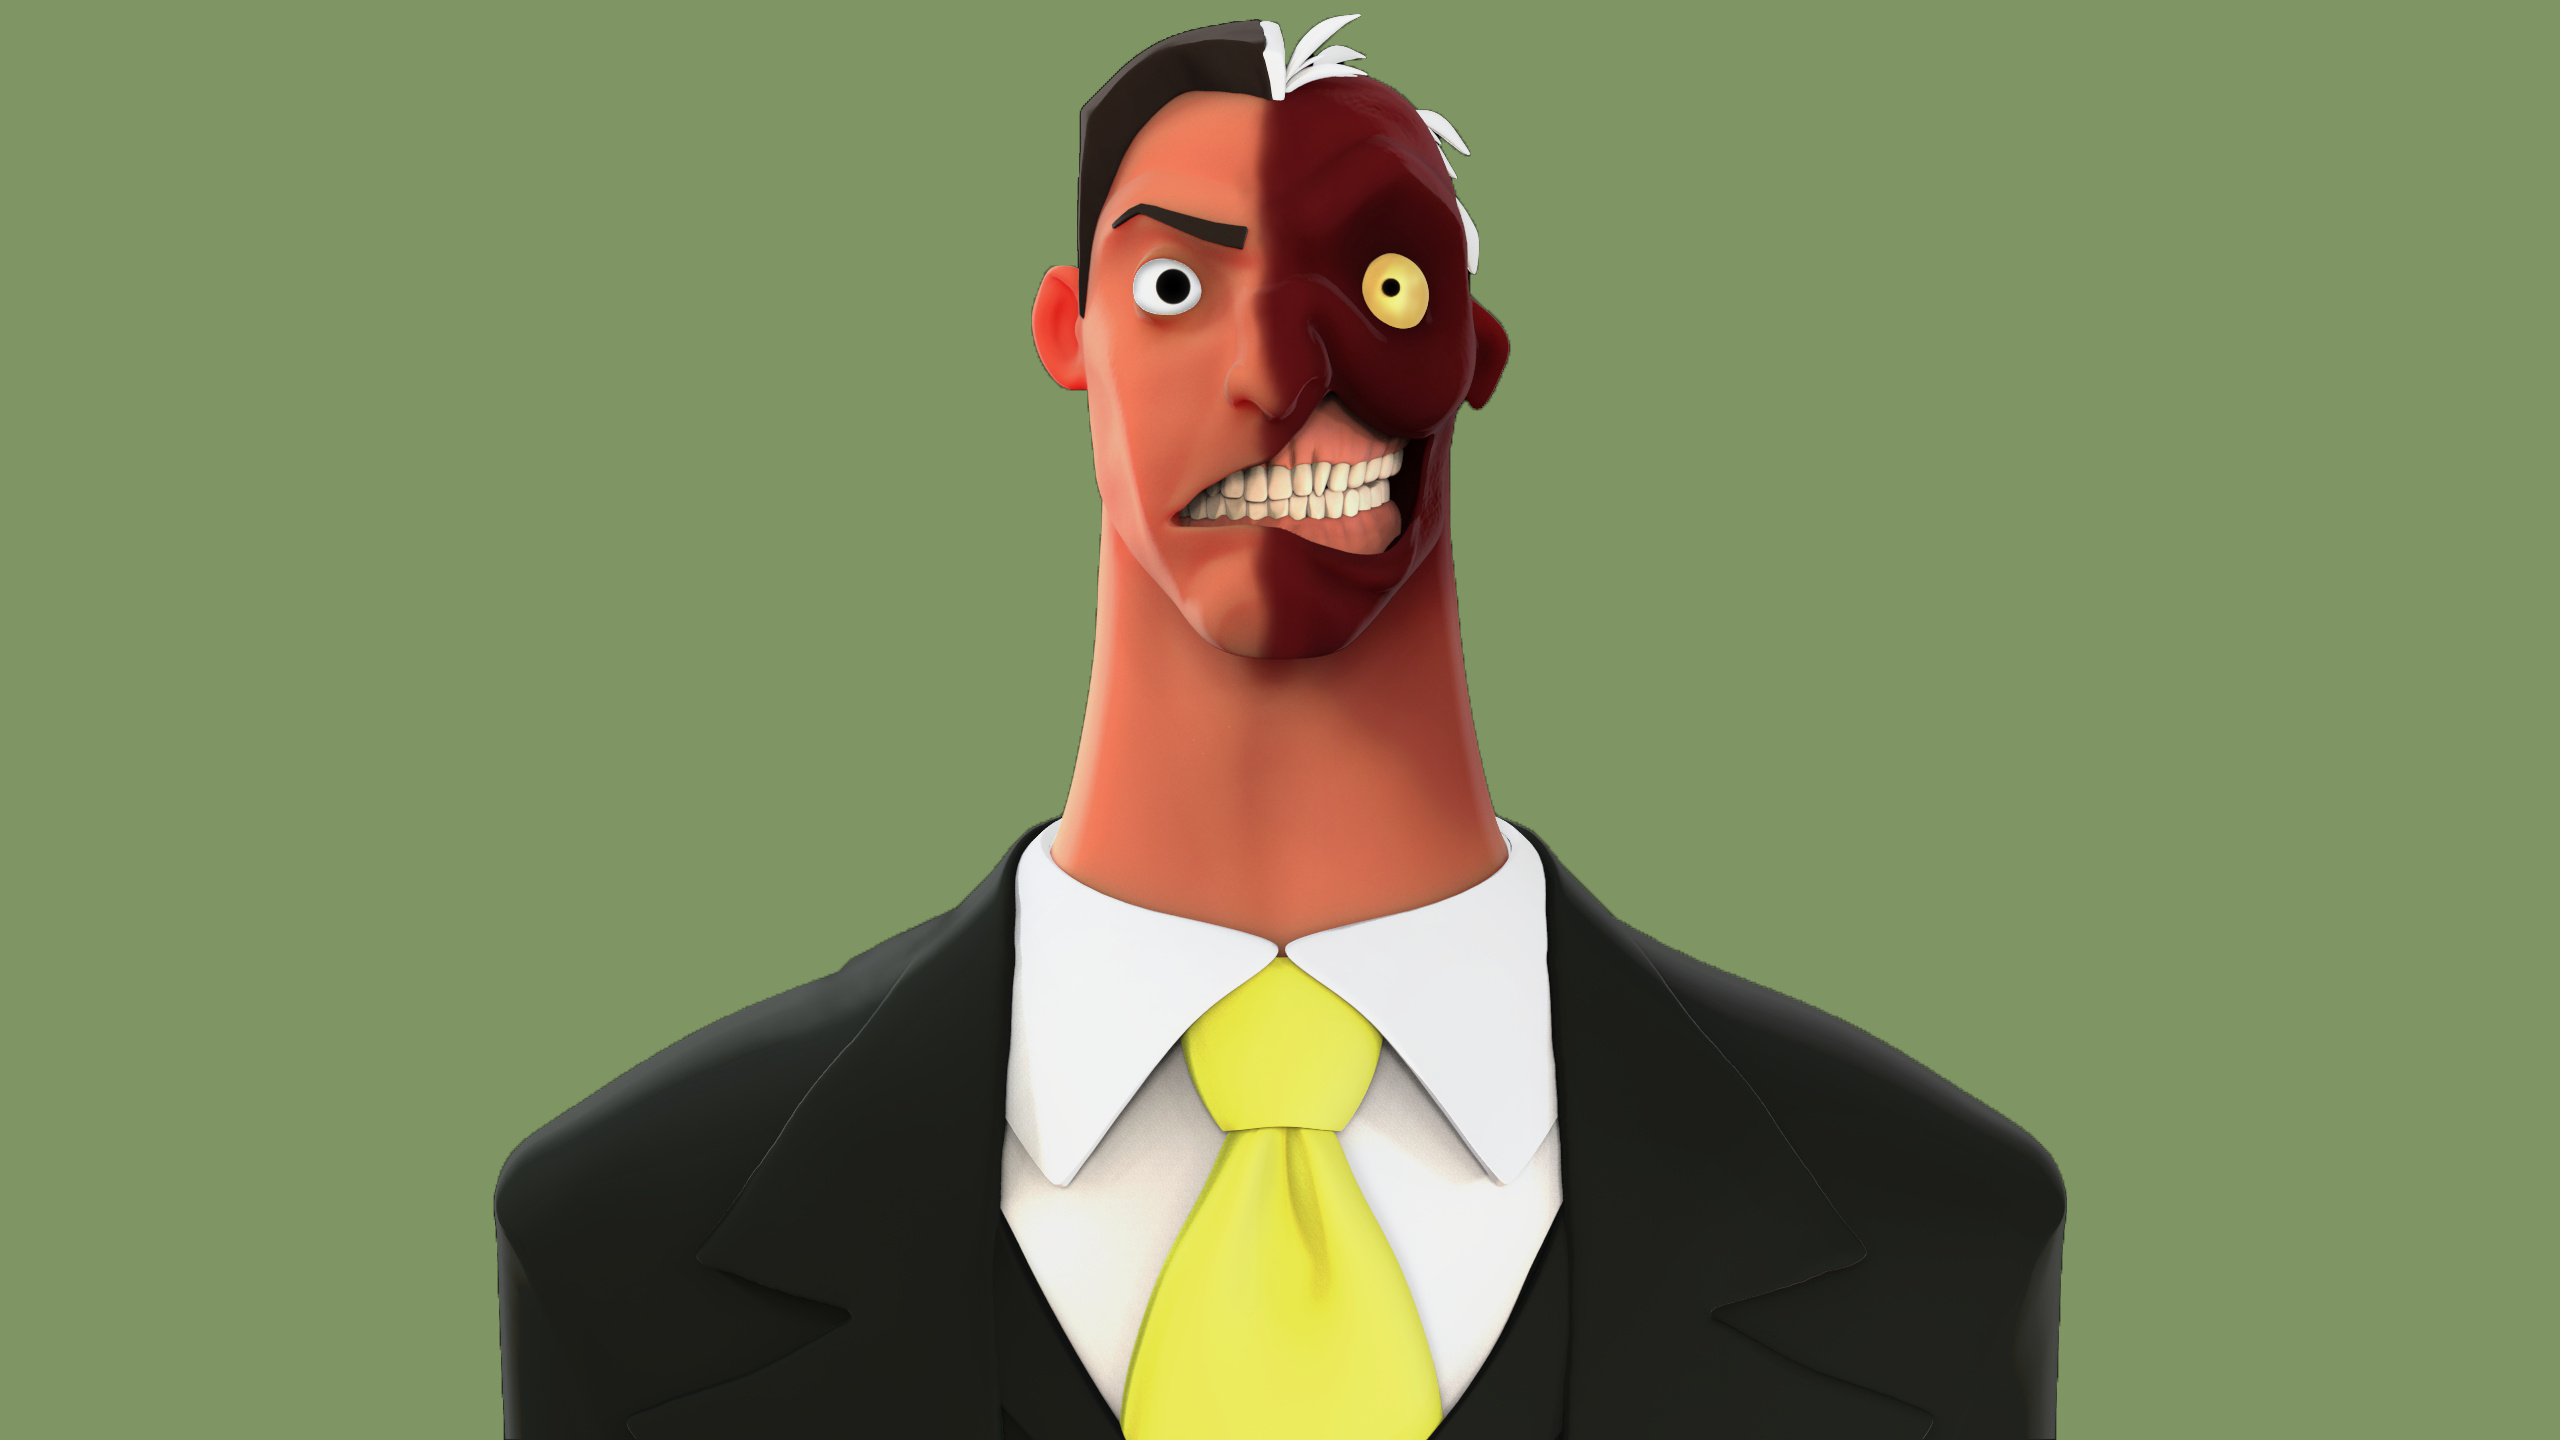 two - face.jpg